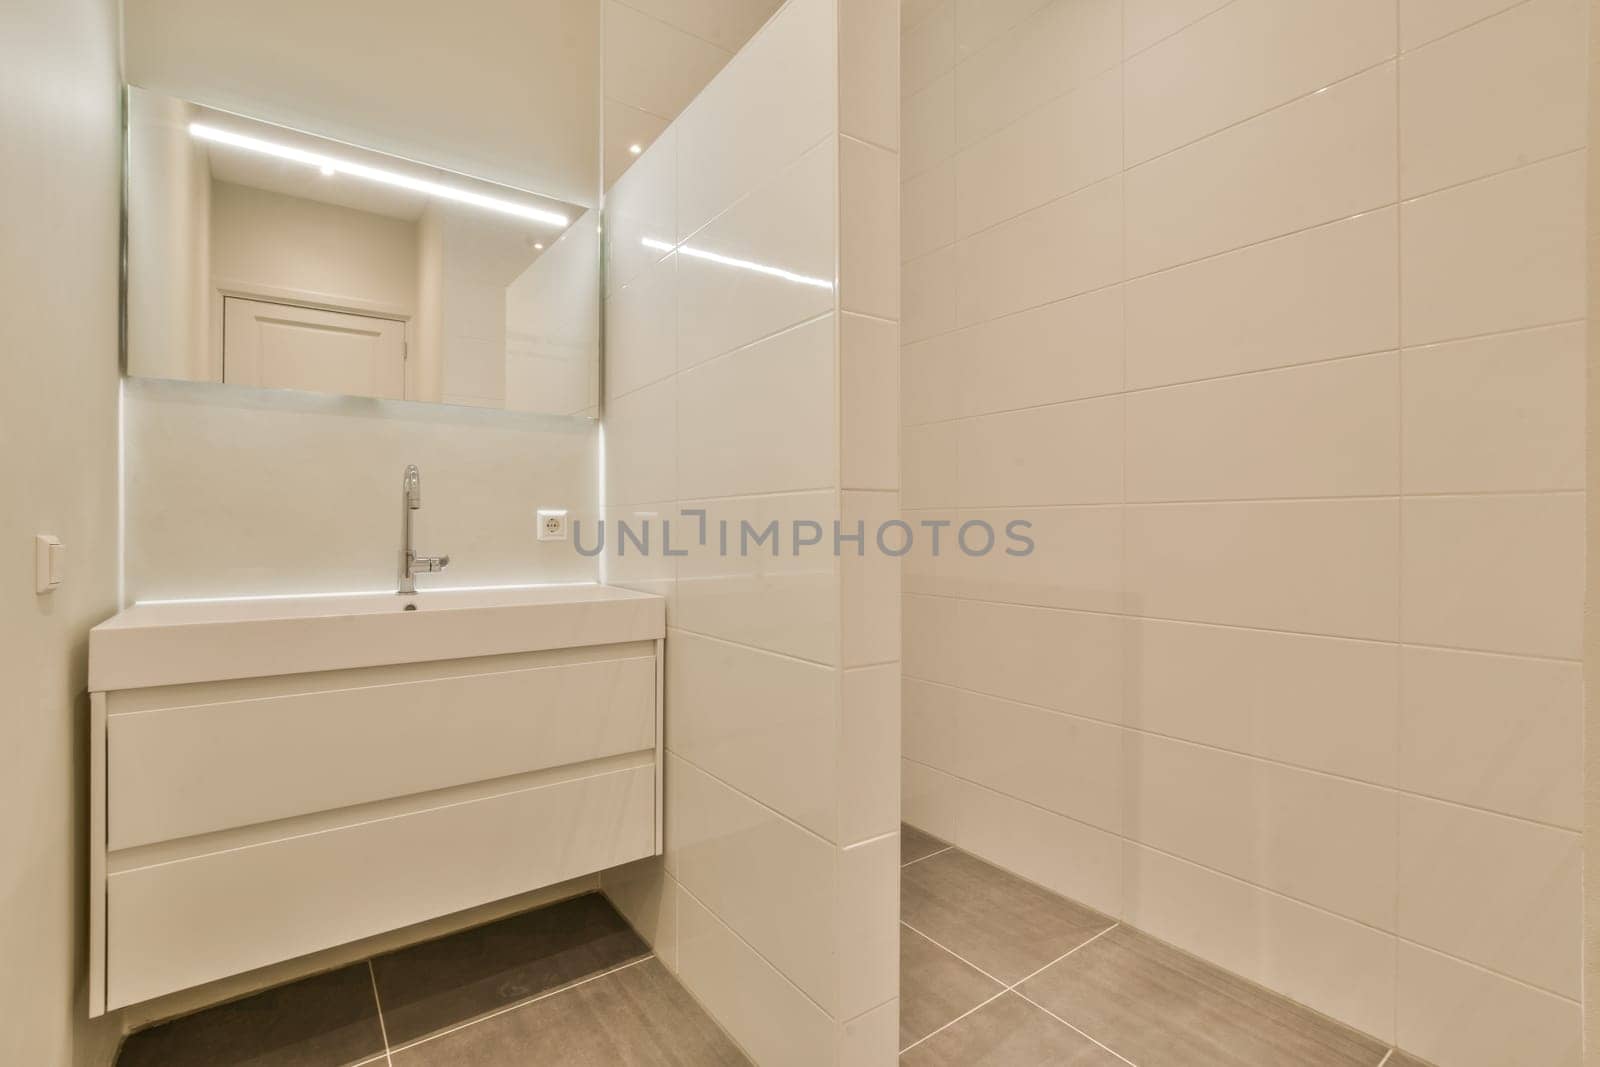 a white bathroom with tile flooring and wall mounted mirror above the sink area in the room is very clean